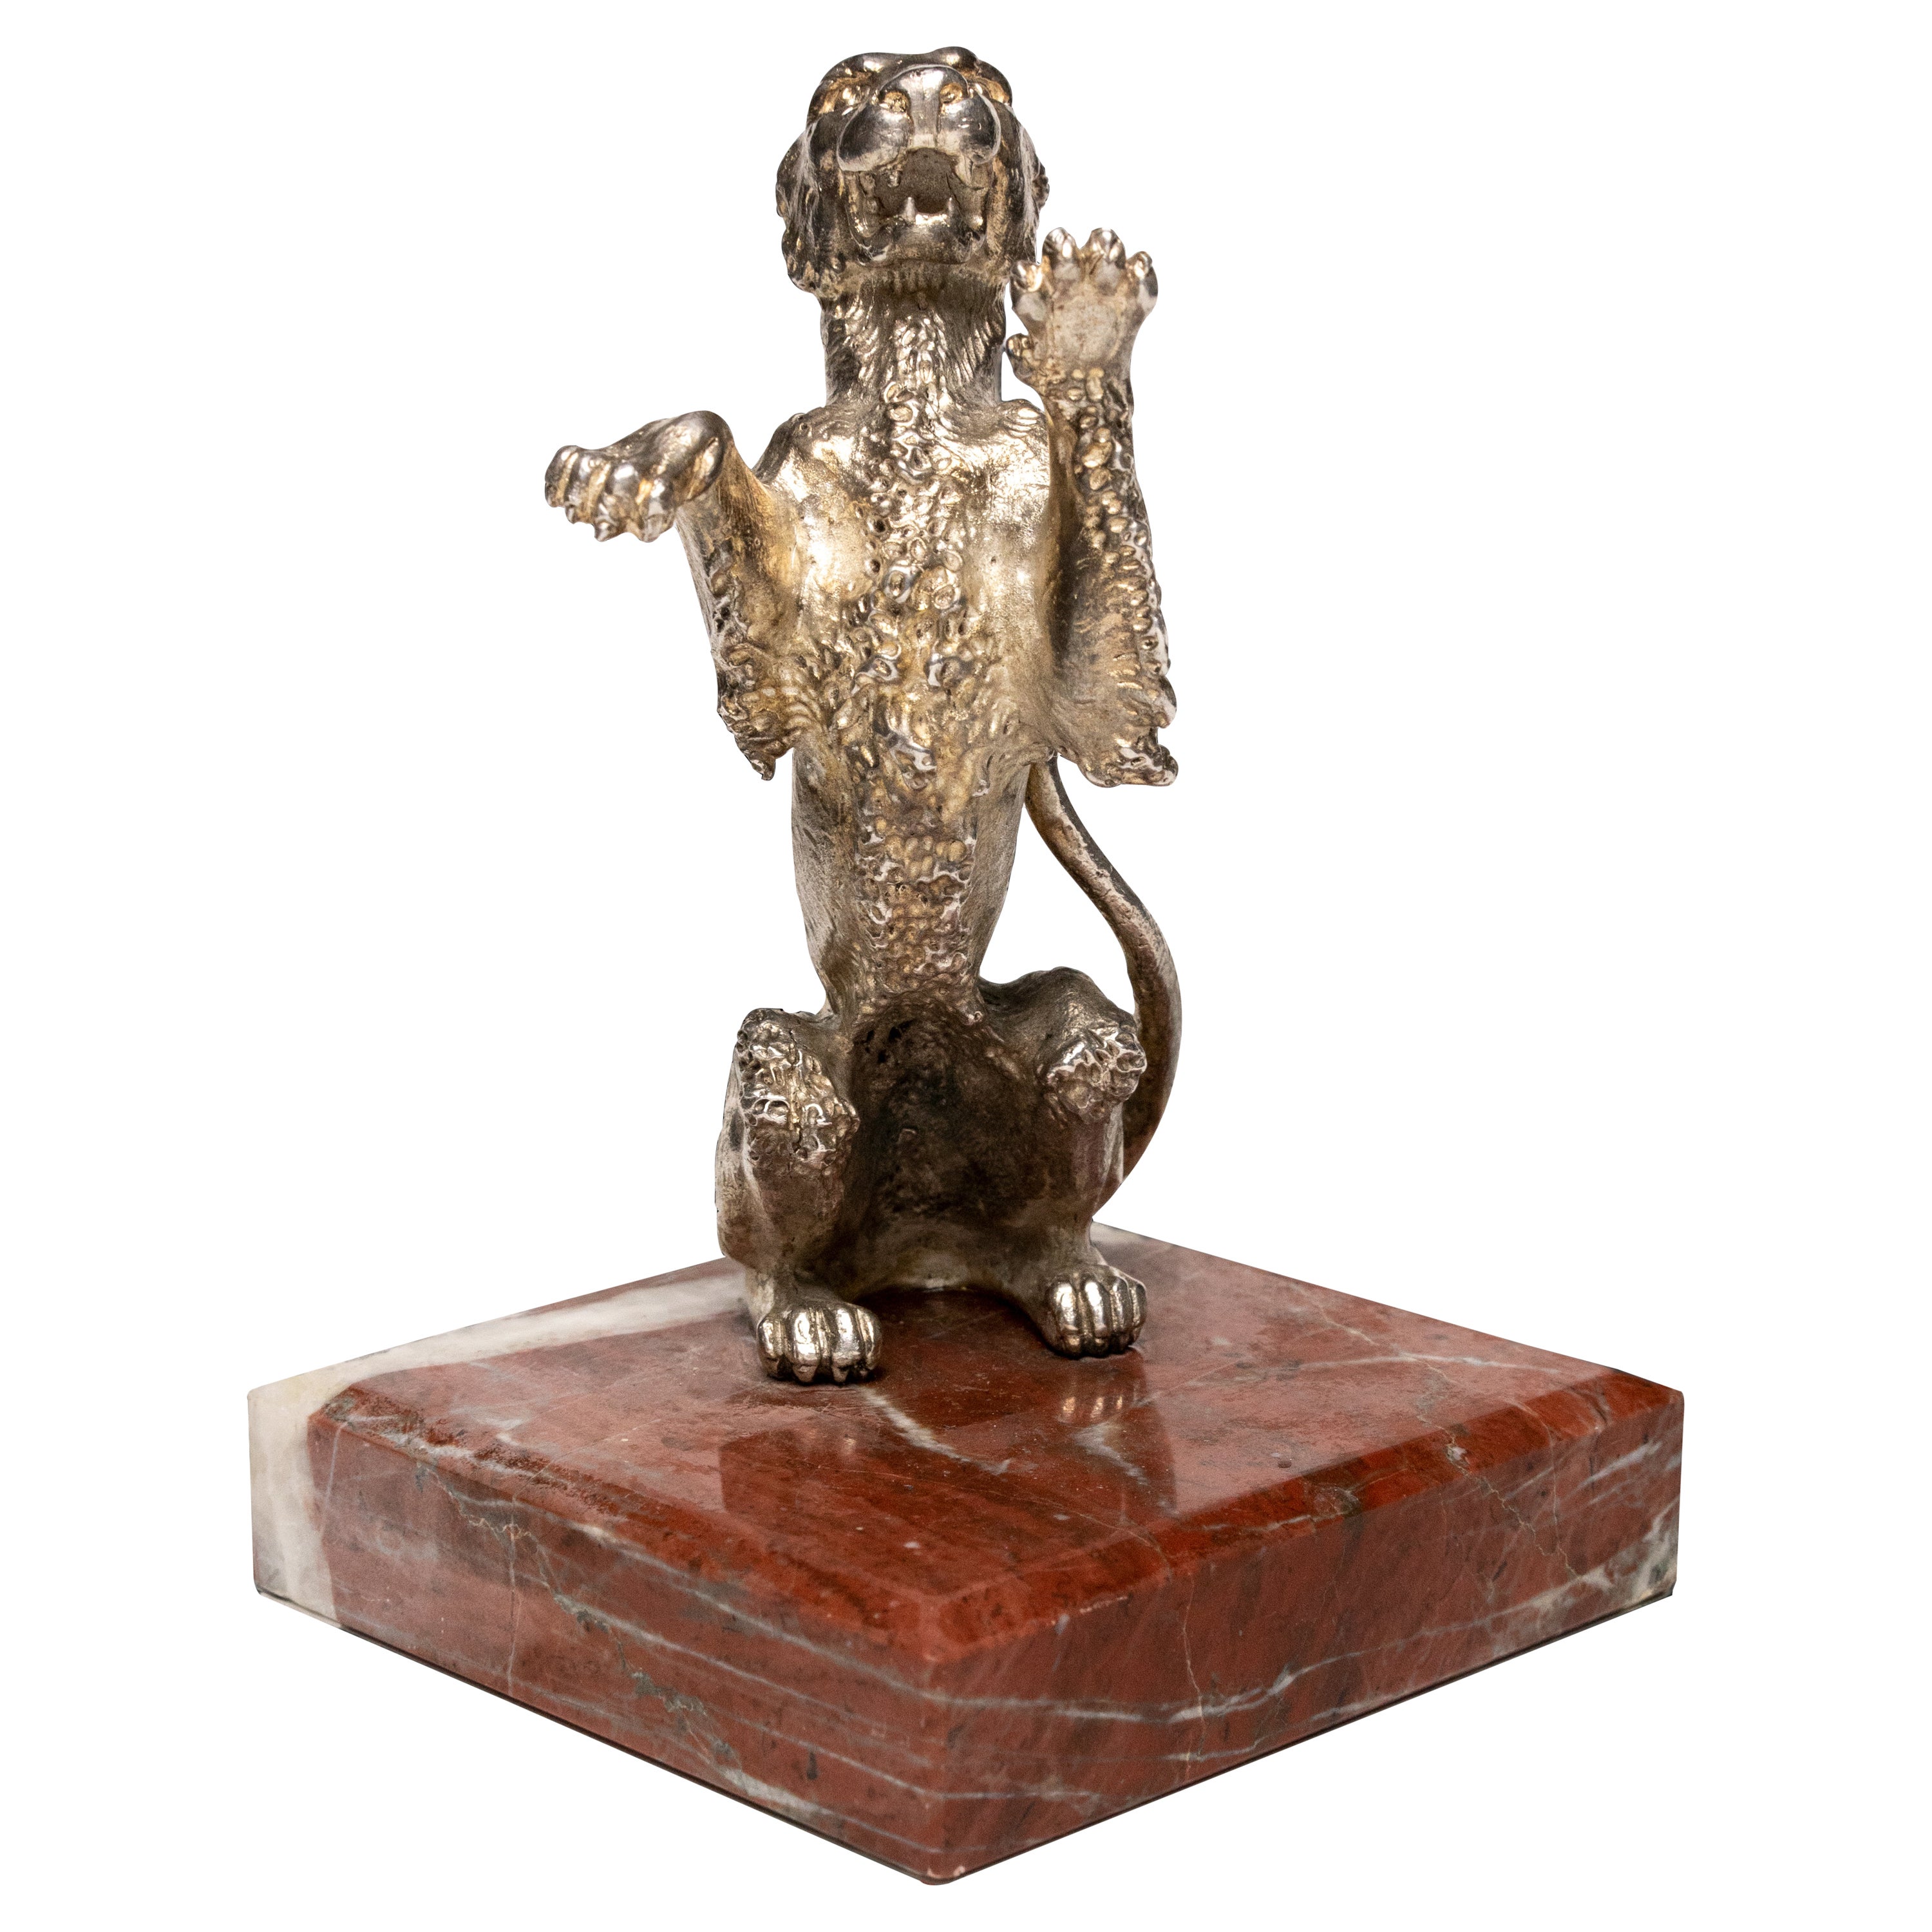 Car Radiator Ornament/Mascot of a Lioness Stamped Odiot